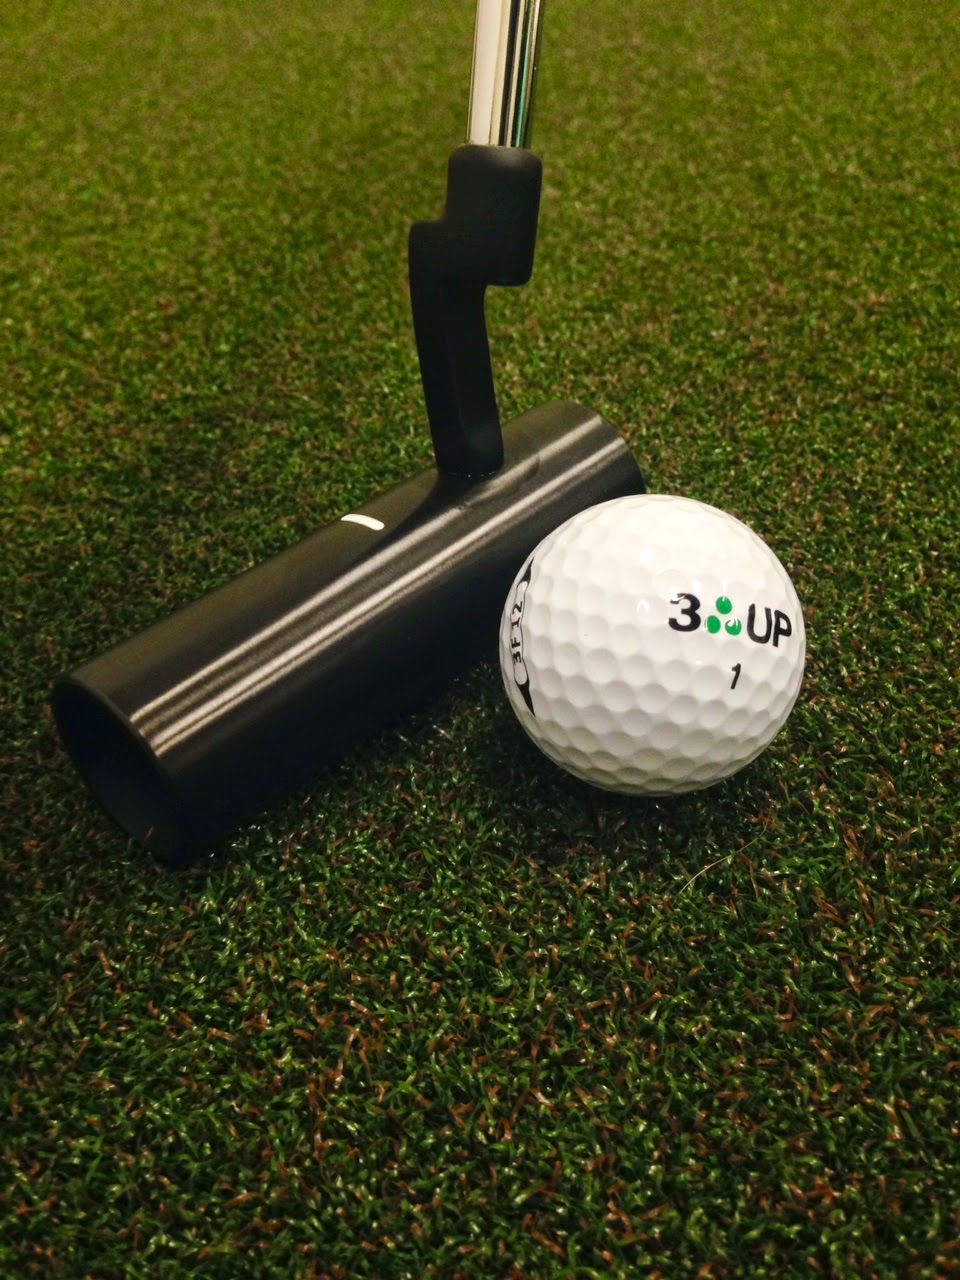 American Golfer: Product Review: Tru-Roll Putters